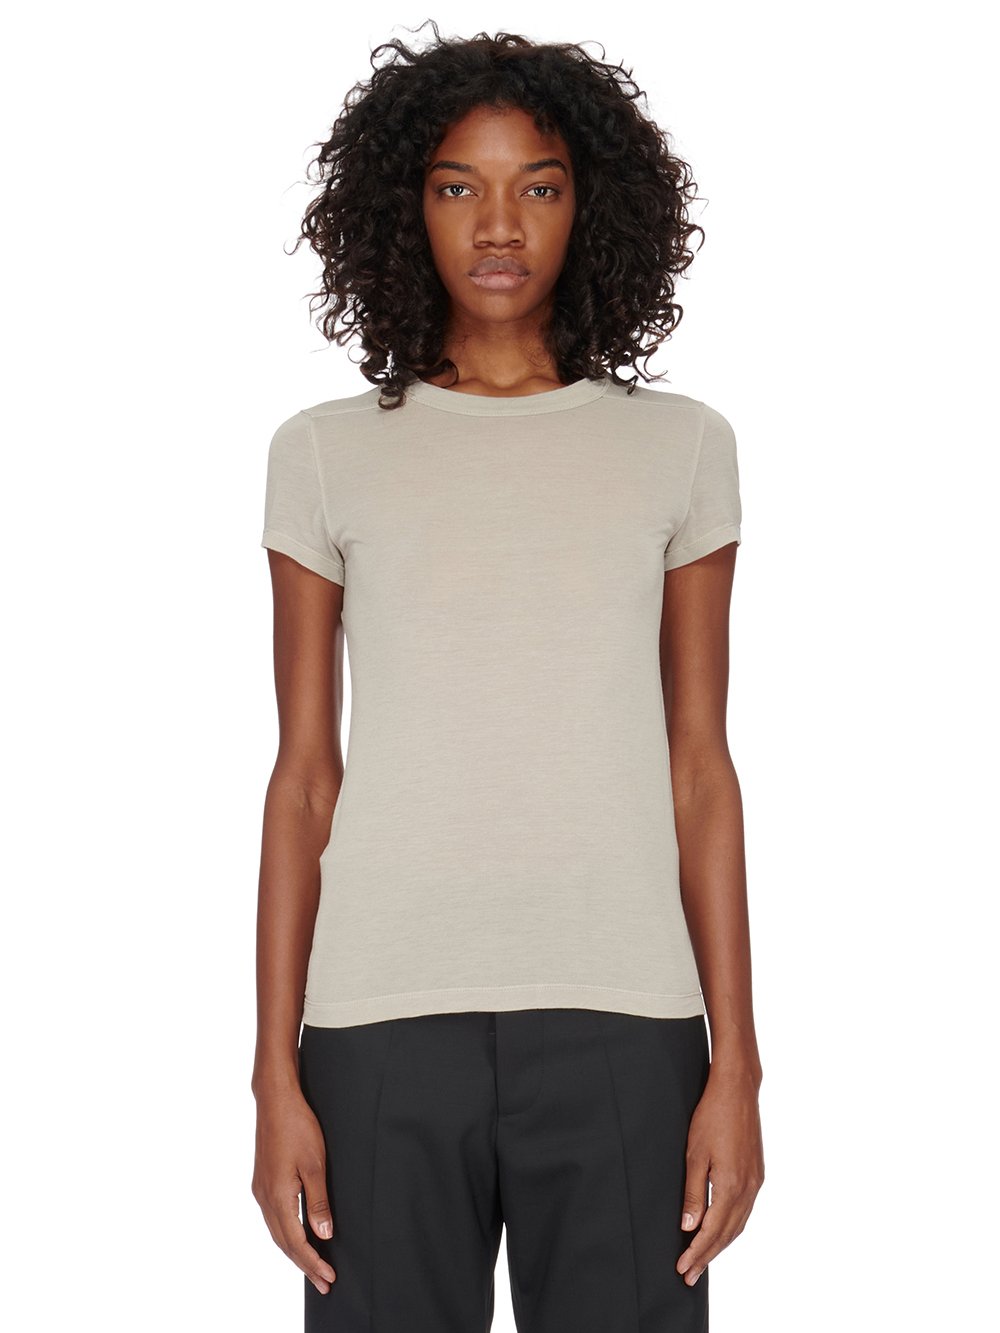 RICK OWENS FW23 LUXOR CROPPED LEVEL T IN PEARL VISCOSE SILK JERSEY